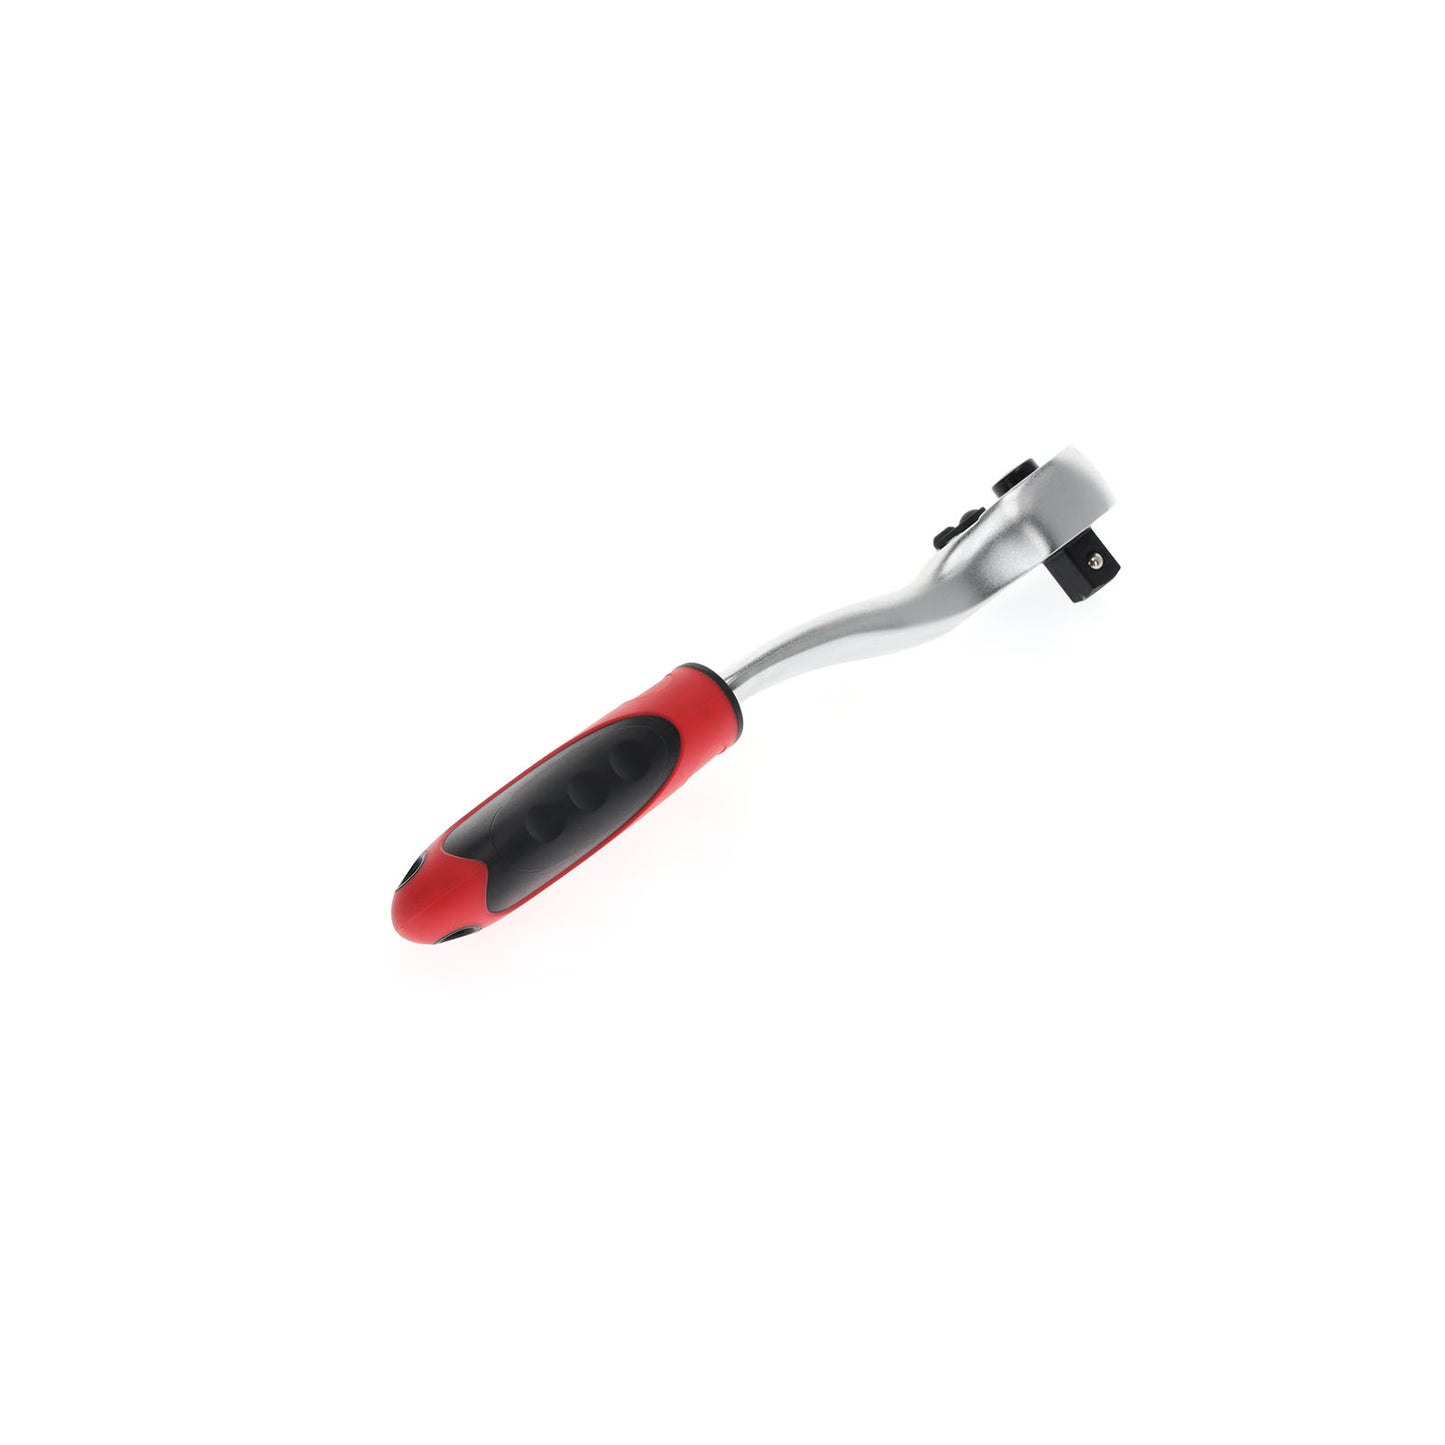 GEDORE red R60050009 - 2-component reversible ratchet 1/2", angled 280 mm (3300411)